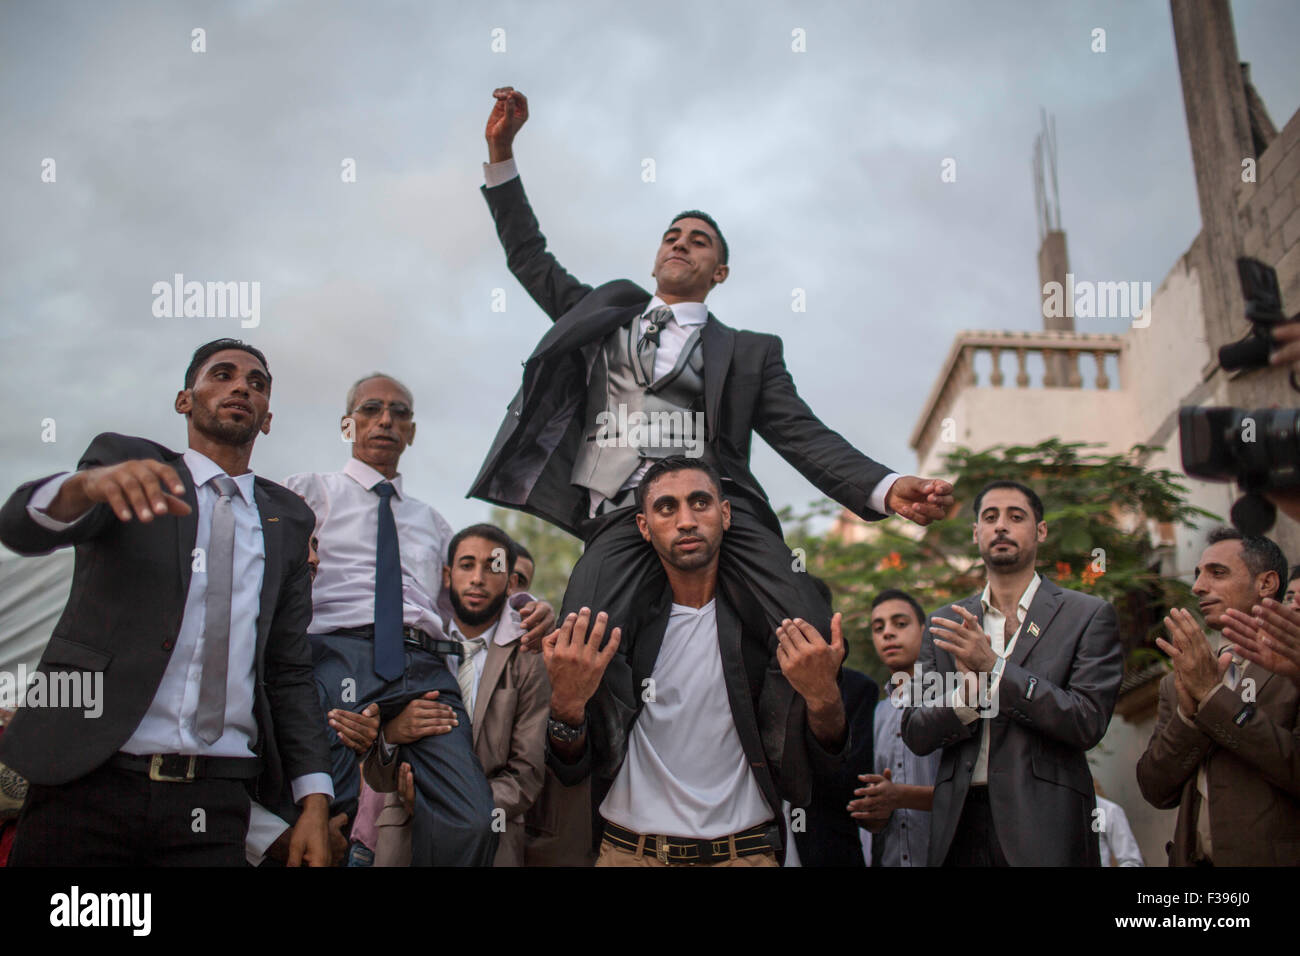 Gaza, Gaza Strip town of Beit Hanun. 1st Oct, 2015. Palestinian groom Mohammed Yousef Al-Masri (C, top) dances with relatives during his wedding in the northern Gaza Strip town of Beit Hanun, on Oct. 1, 2015. © Wissam Nassar/Xinhua/Alamy Live News Stock Photo